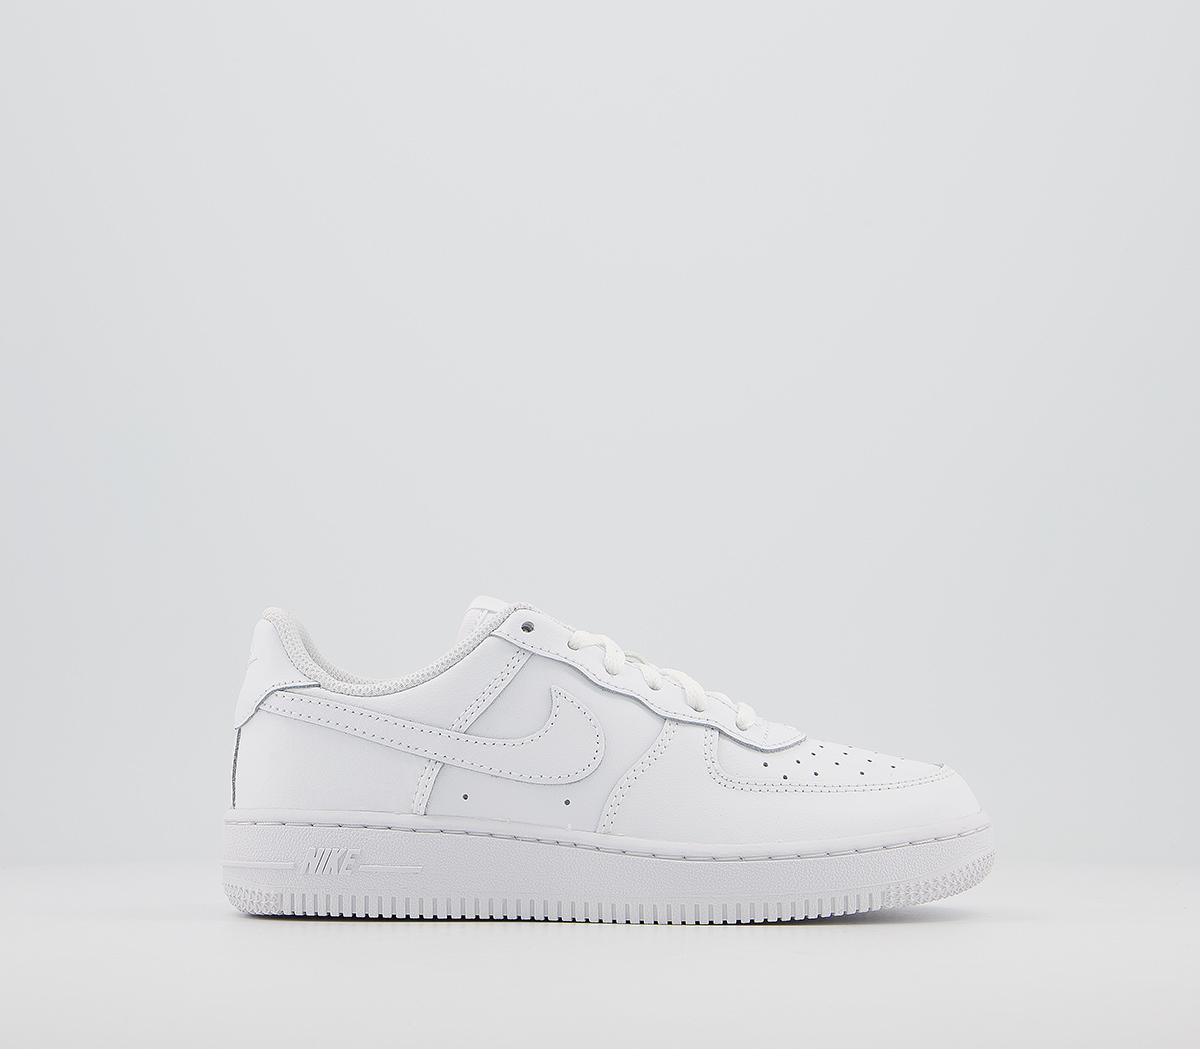 white & black air force 1 trainers youth